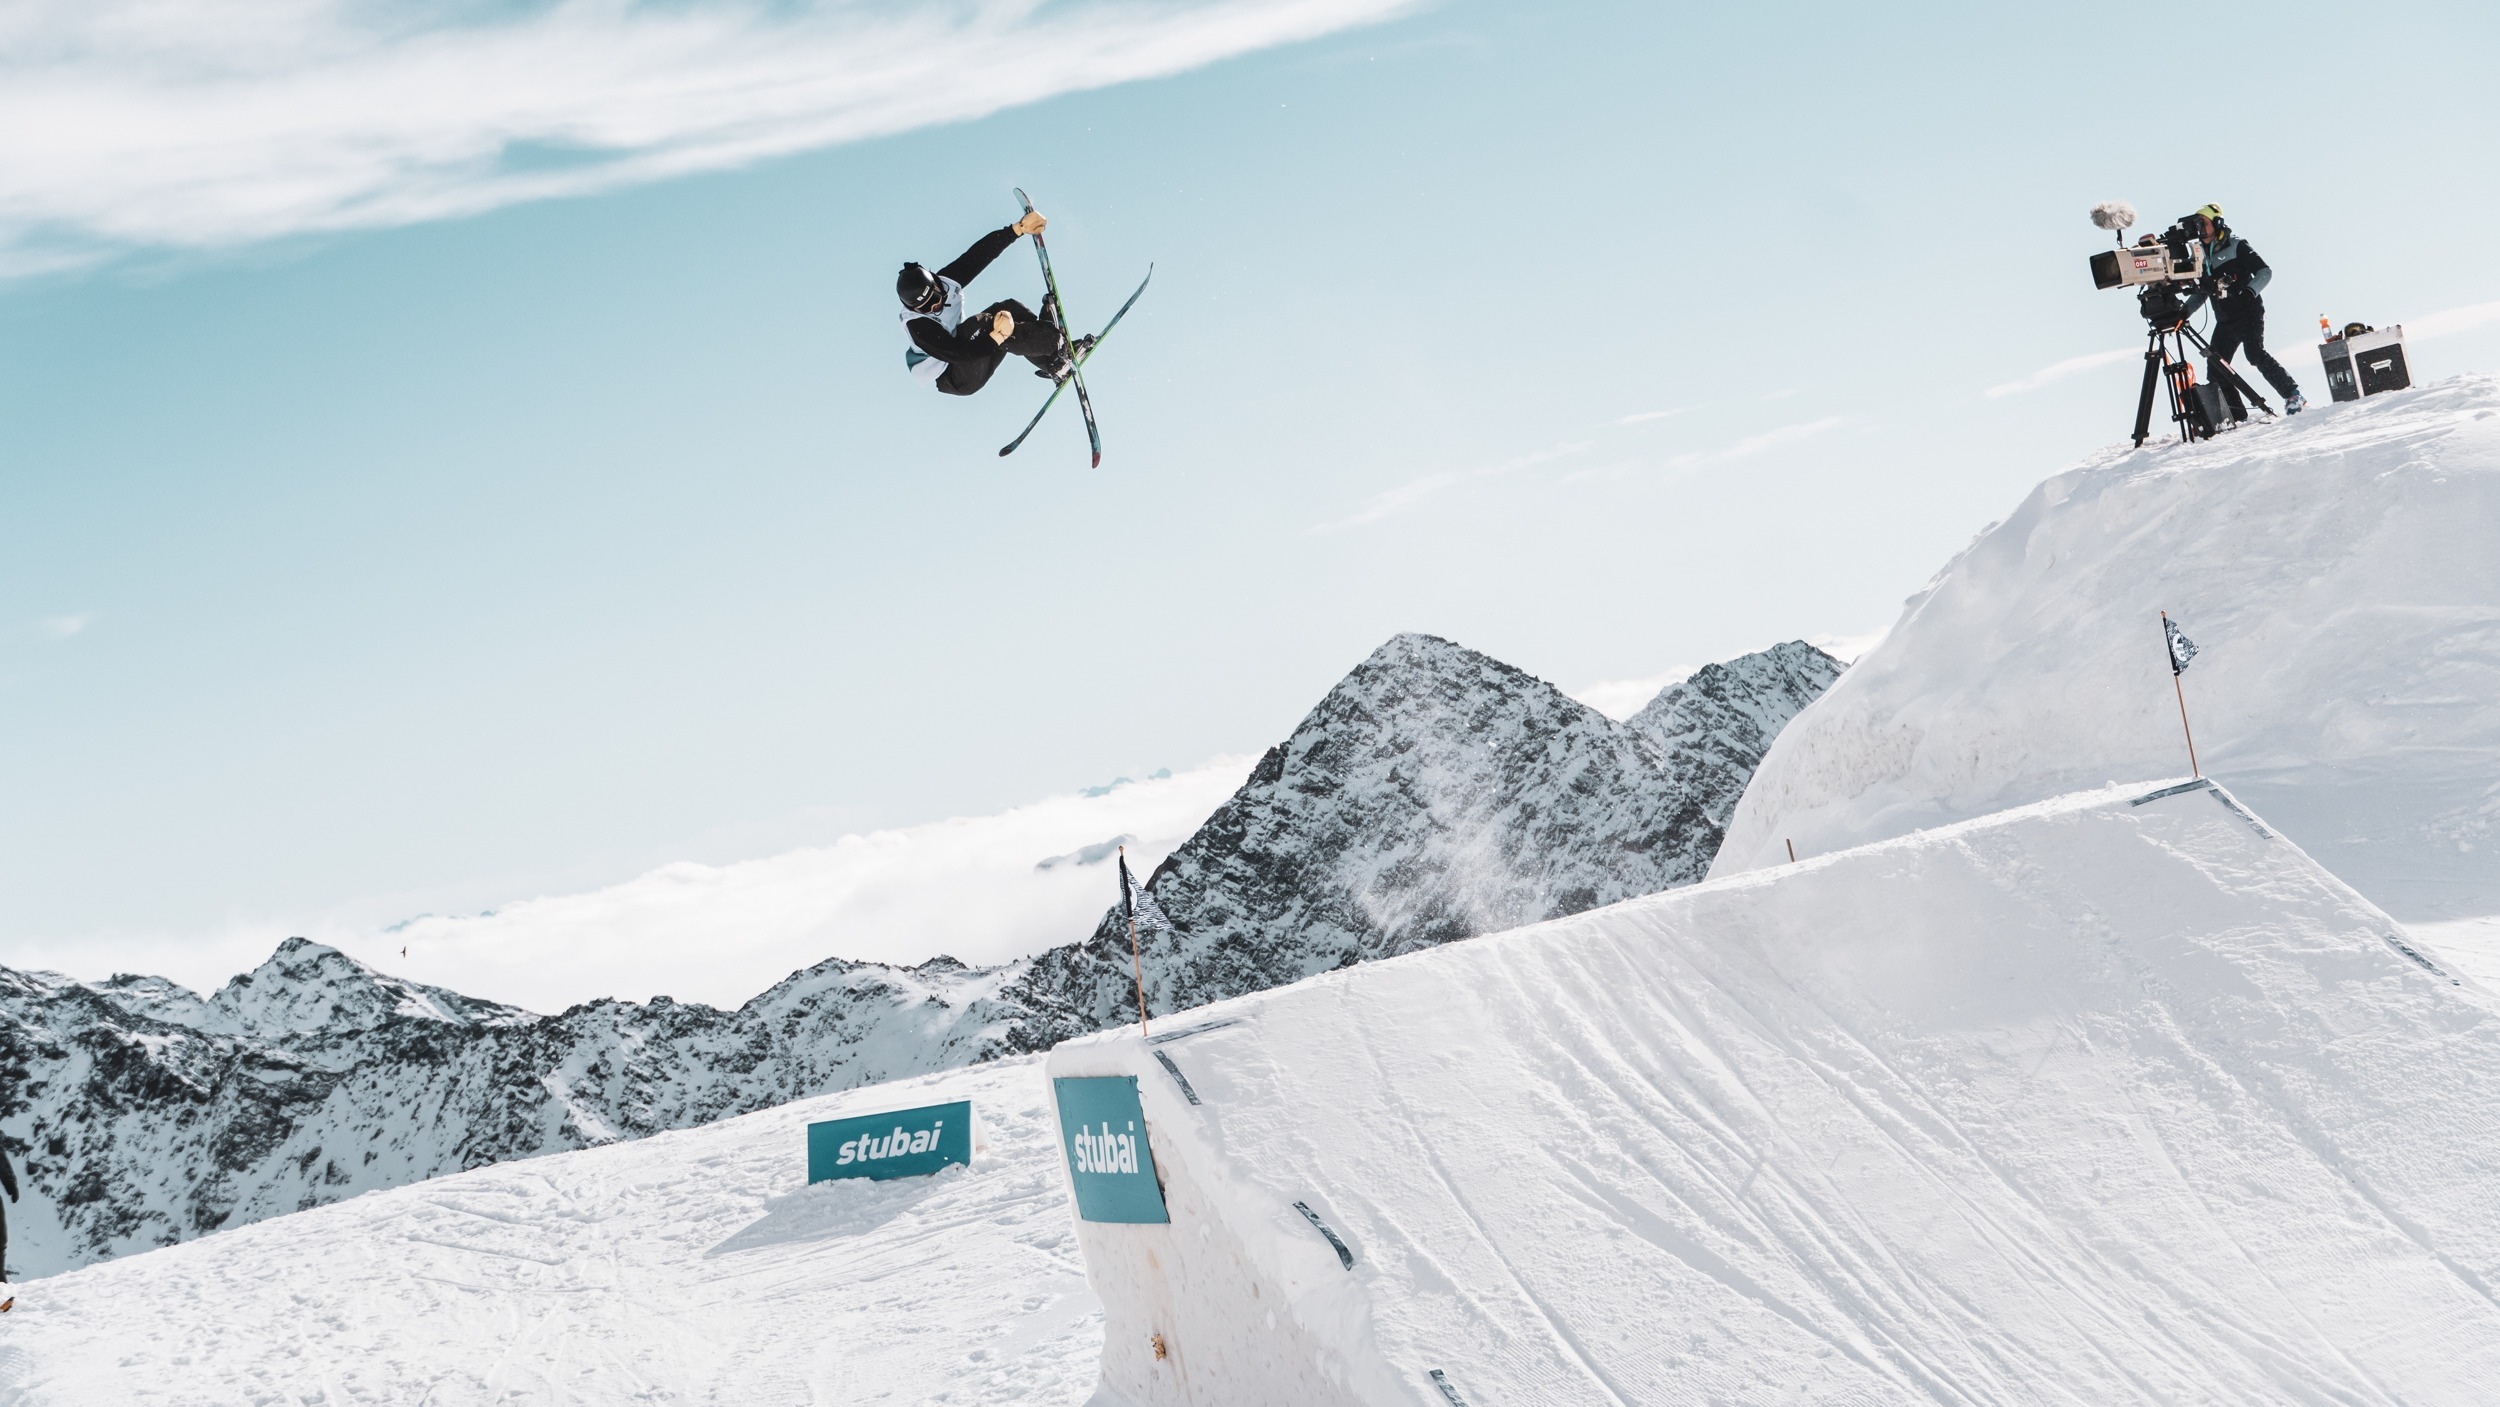 FIS Slopestyle World Cup, Stubai - Results and Recap